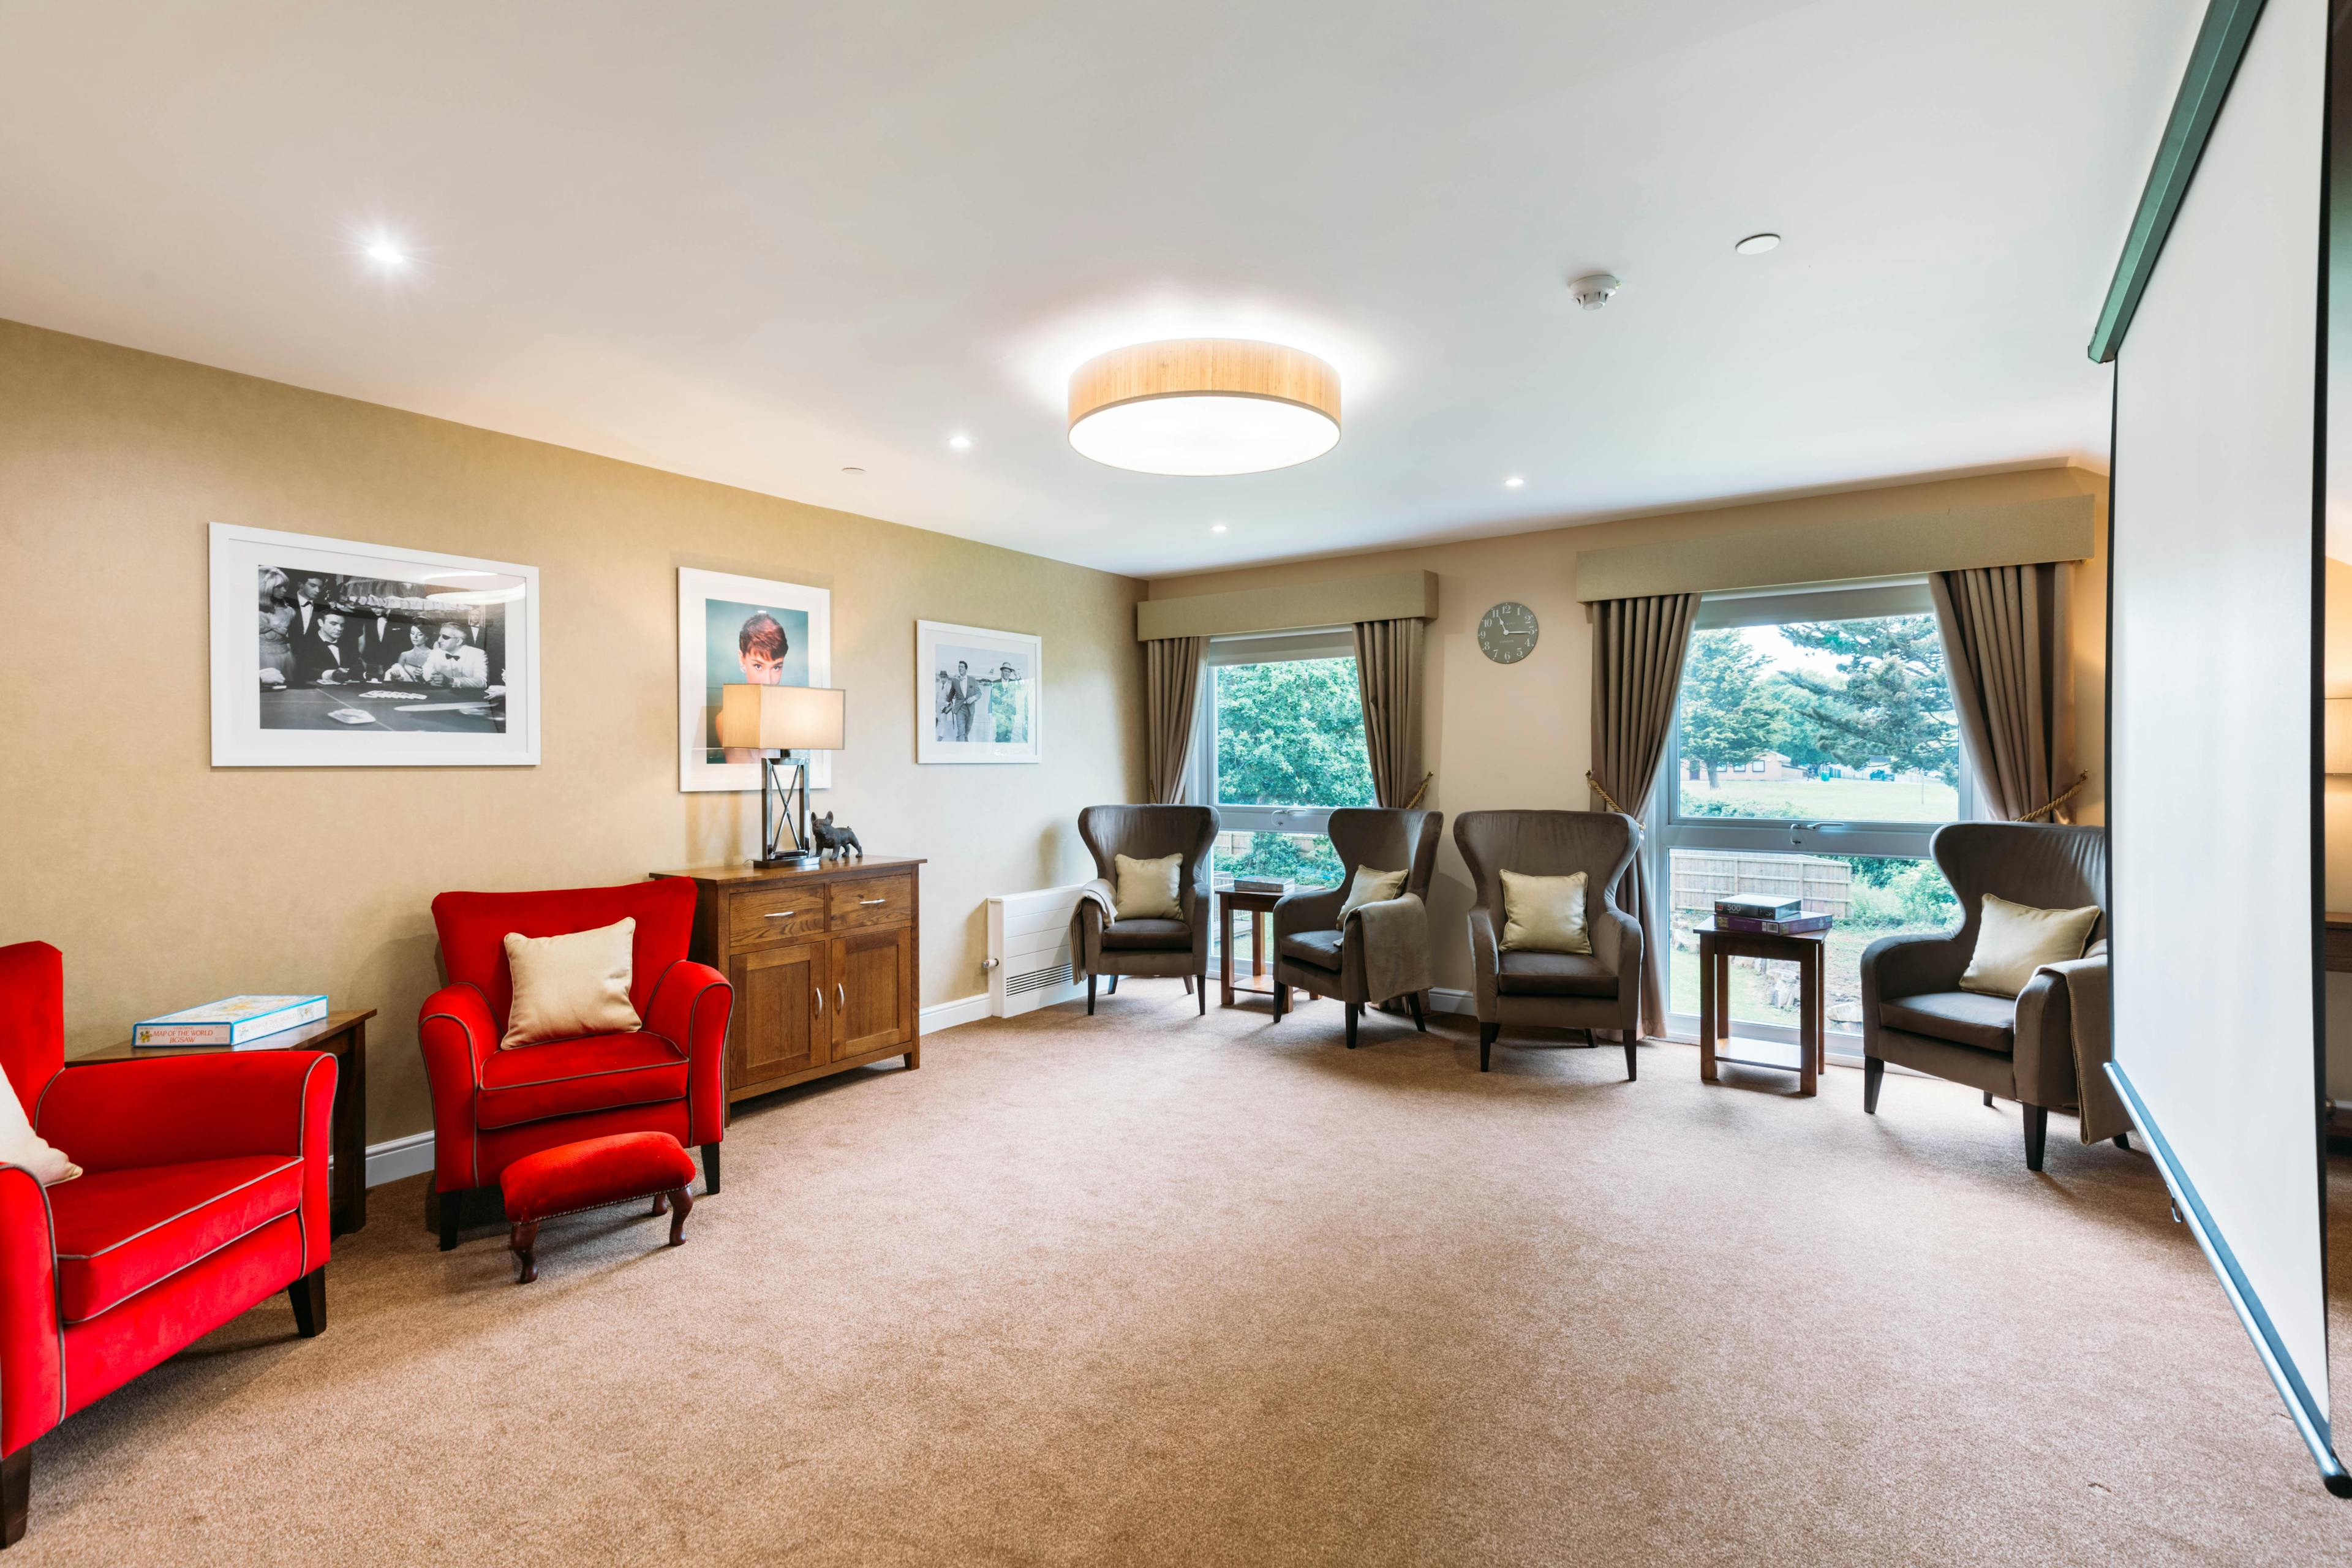 Communal Lounge in Orchard House Care Home in Newport, Isle of Wight